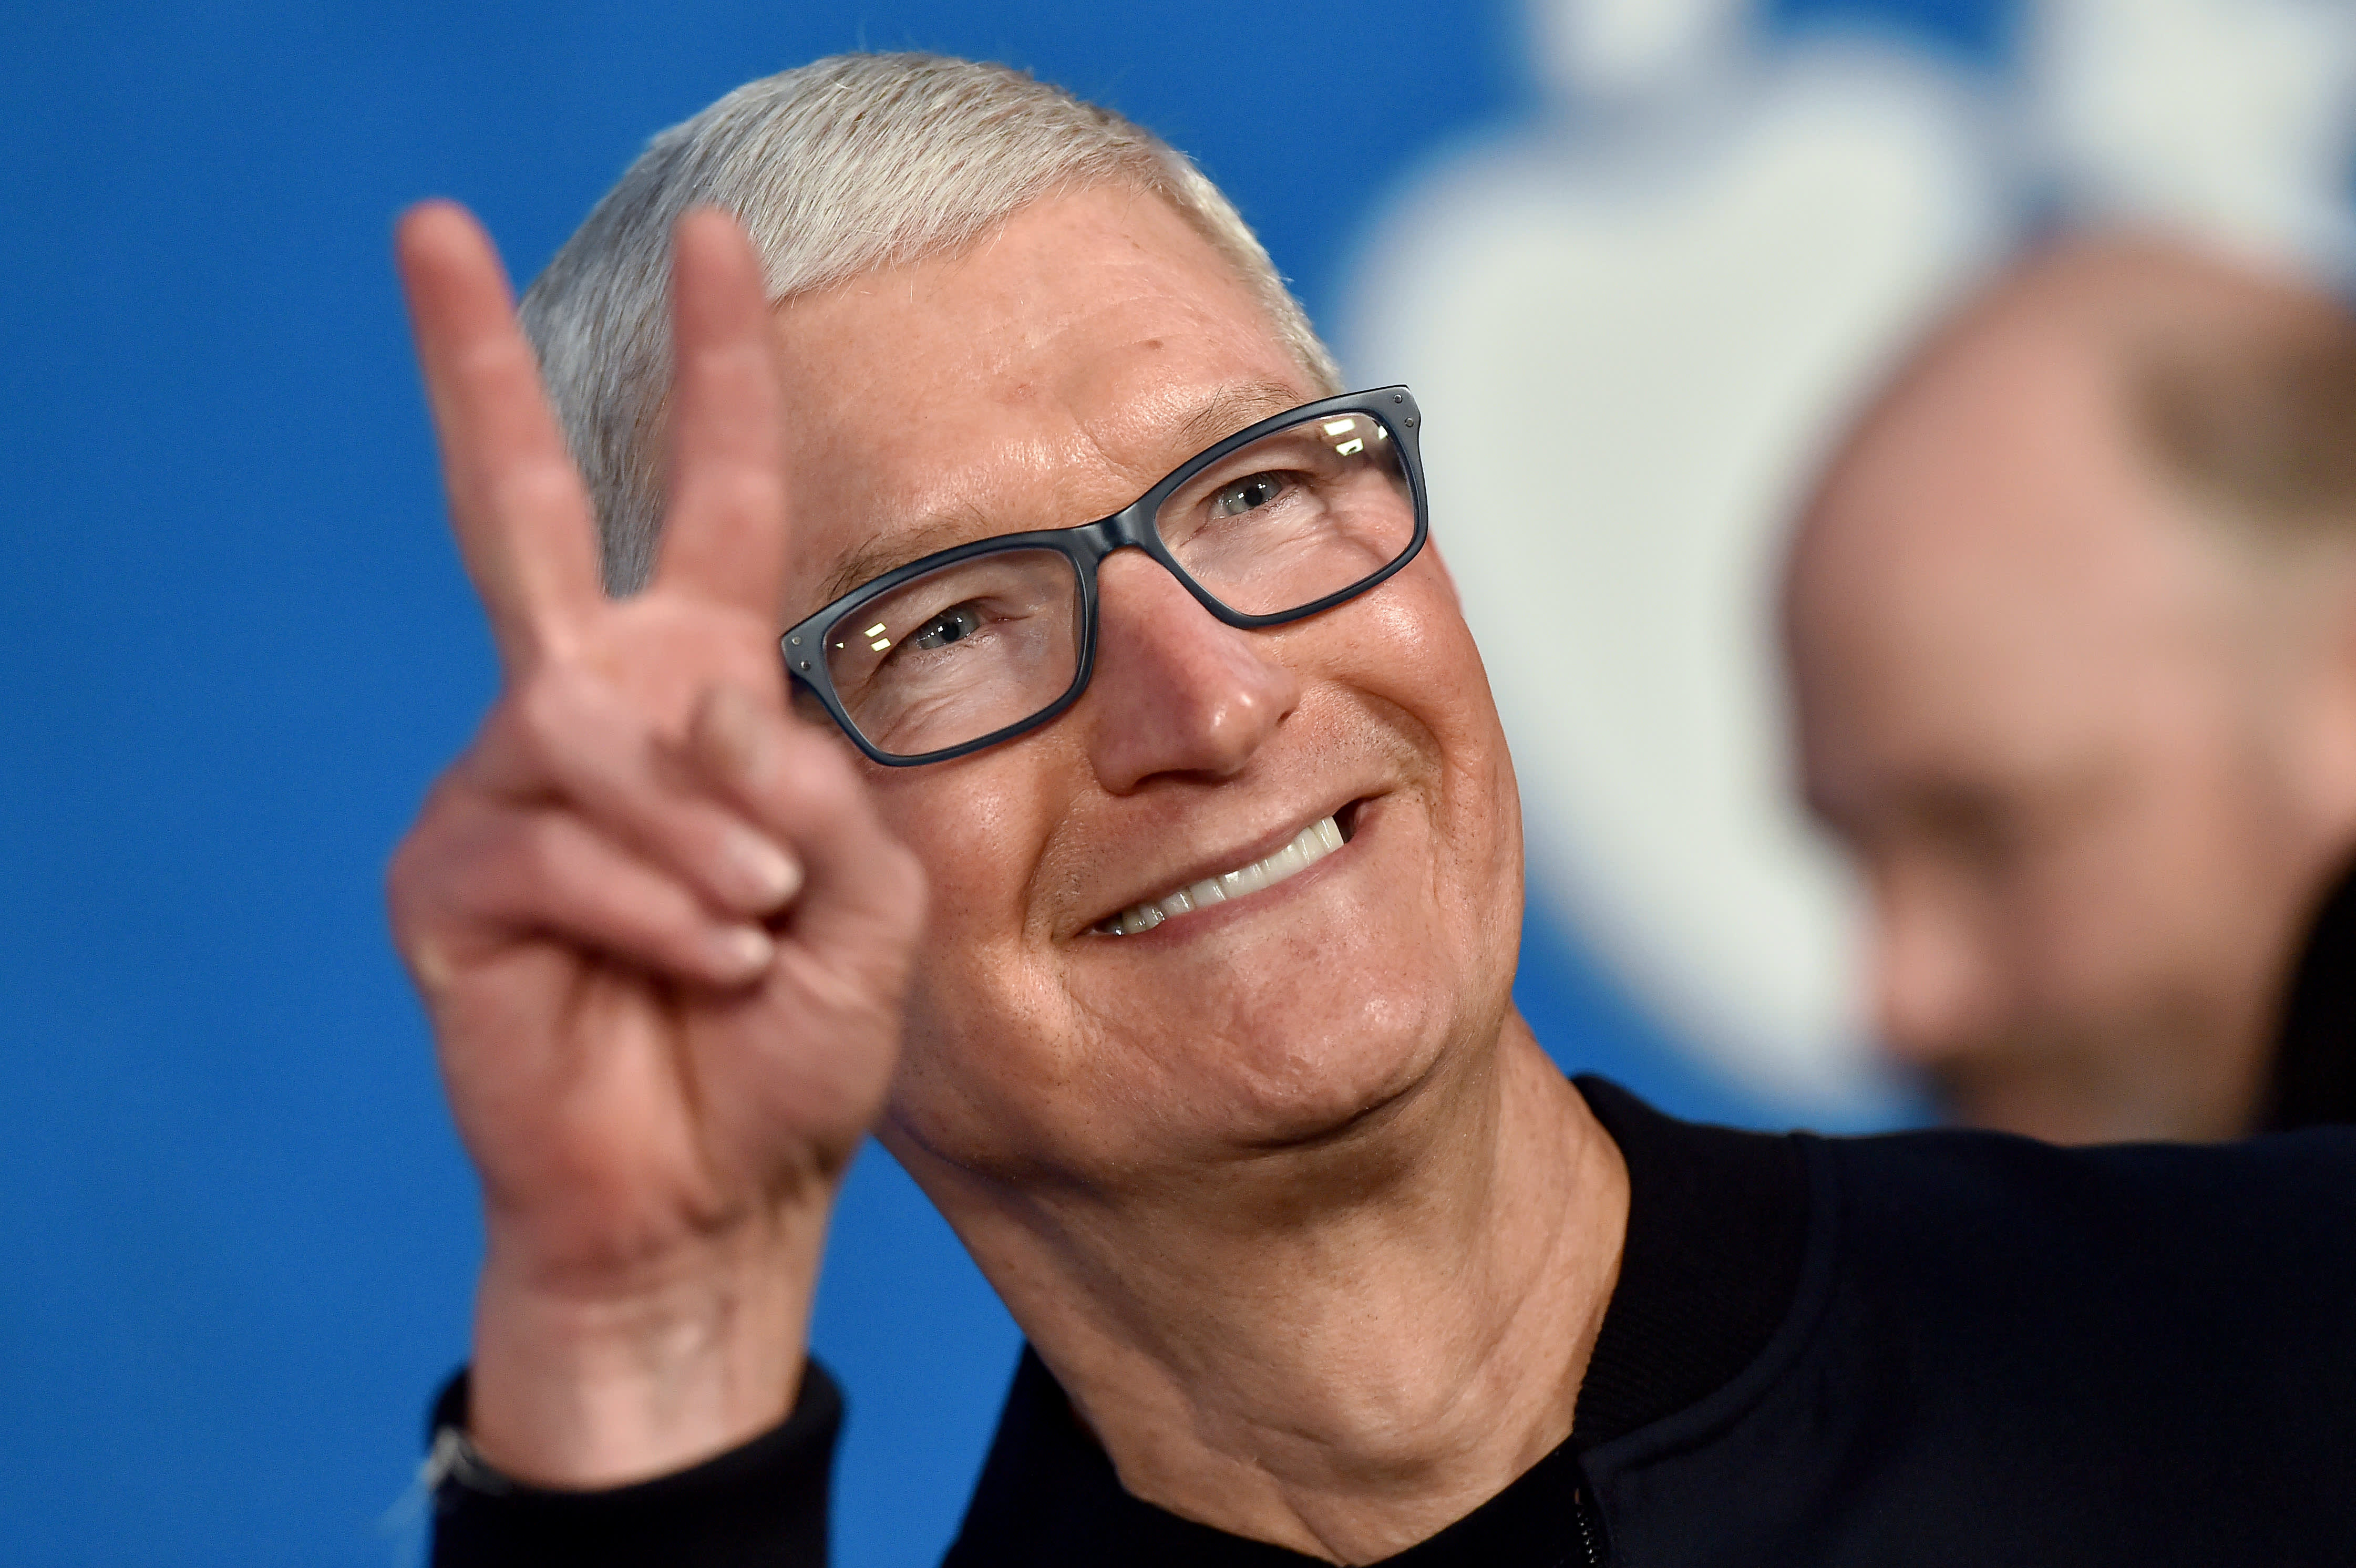 Tim Cook receives over five million shares of Apple stock worth $750 million